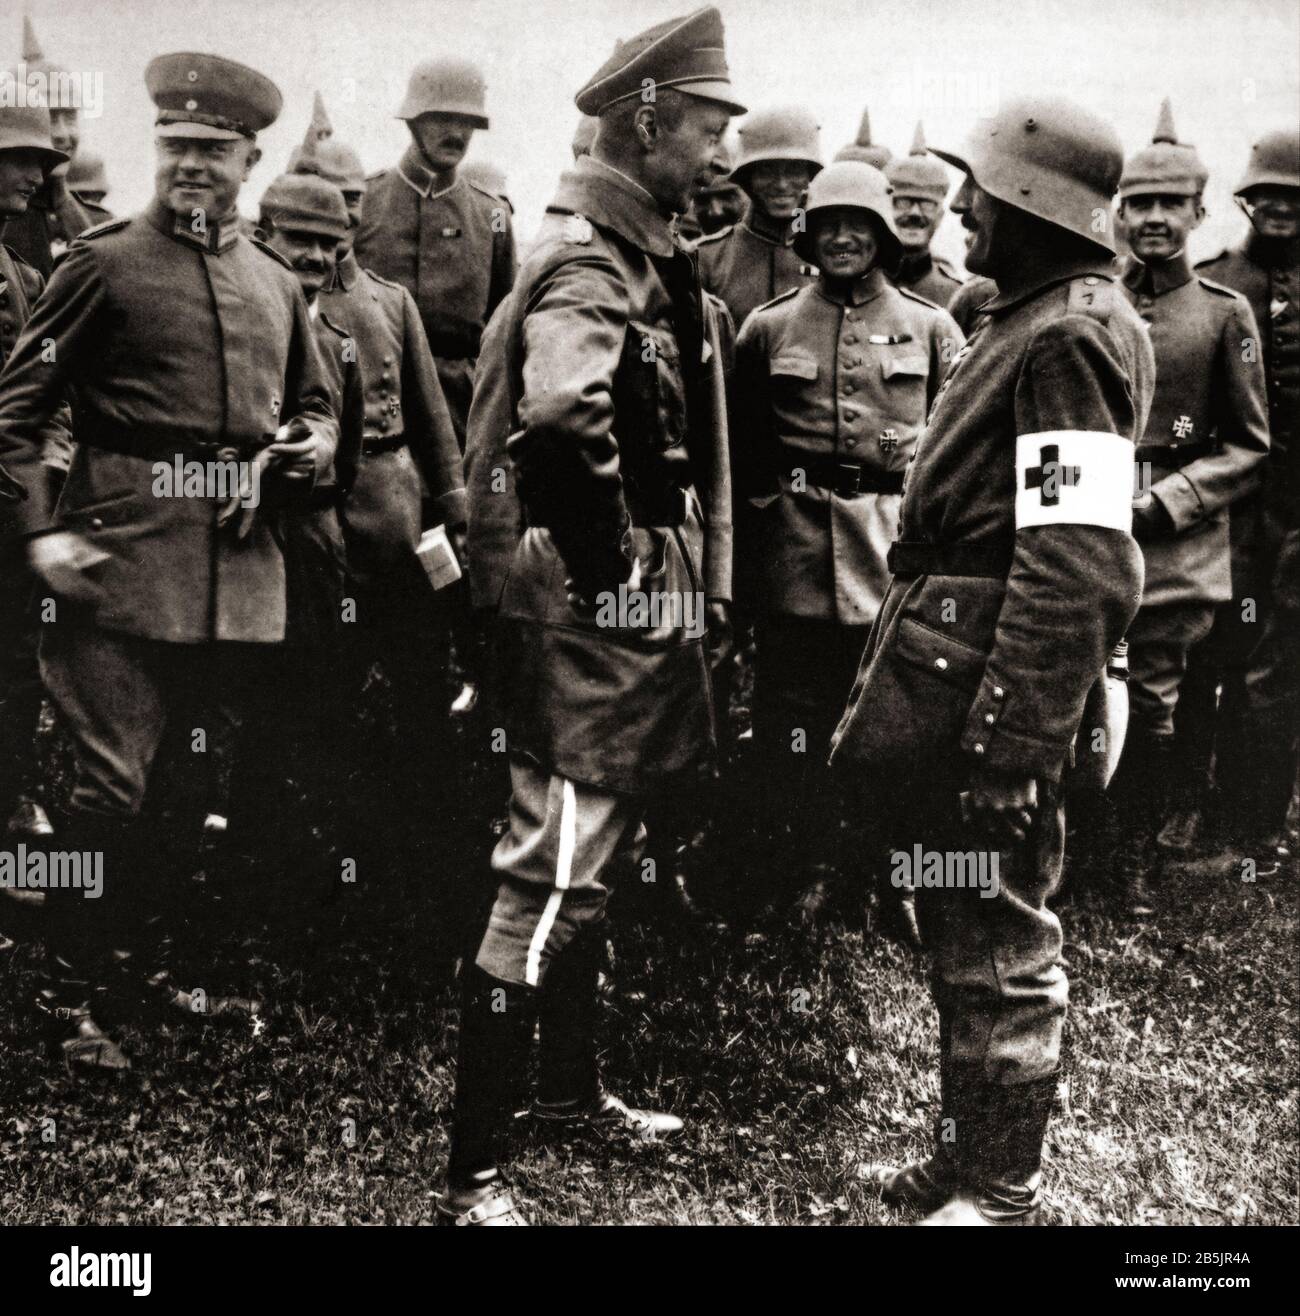 Crown Prince Wilhelm, commander of 5th Army heir, talking to a stretcher bearer. Following the 5th Army's victory in the Battle of the Ardennes it moved to Verdun, where in February 1916 the Crown Prince's 5th Army would launch Operation Gericht, the German offensive that began the Battle of Verdun, one of the bloodiest and longest battles in history. Stock Photo